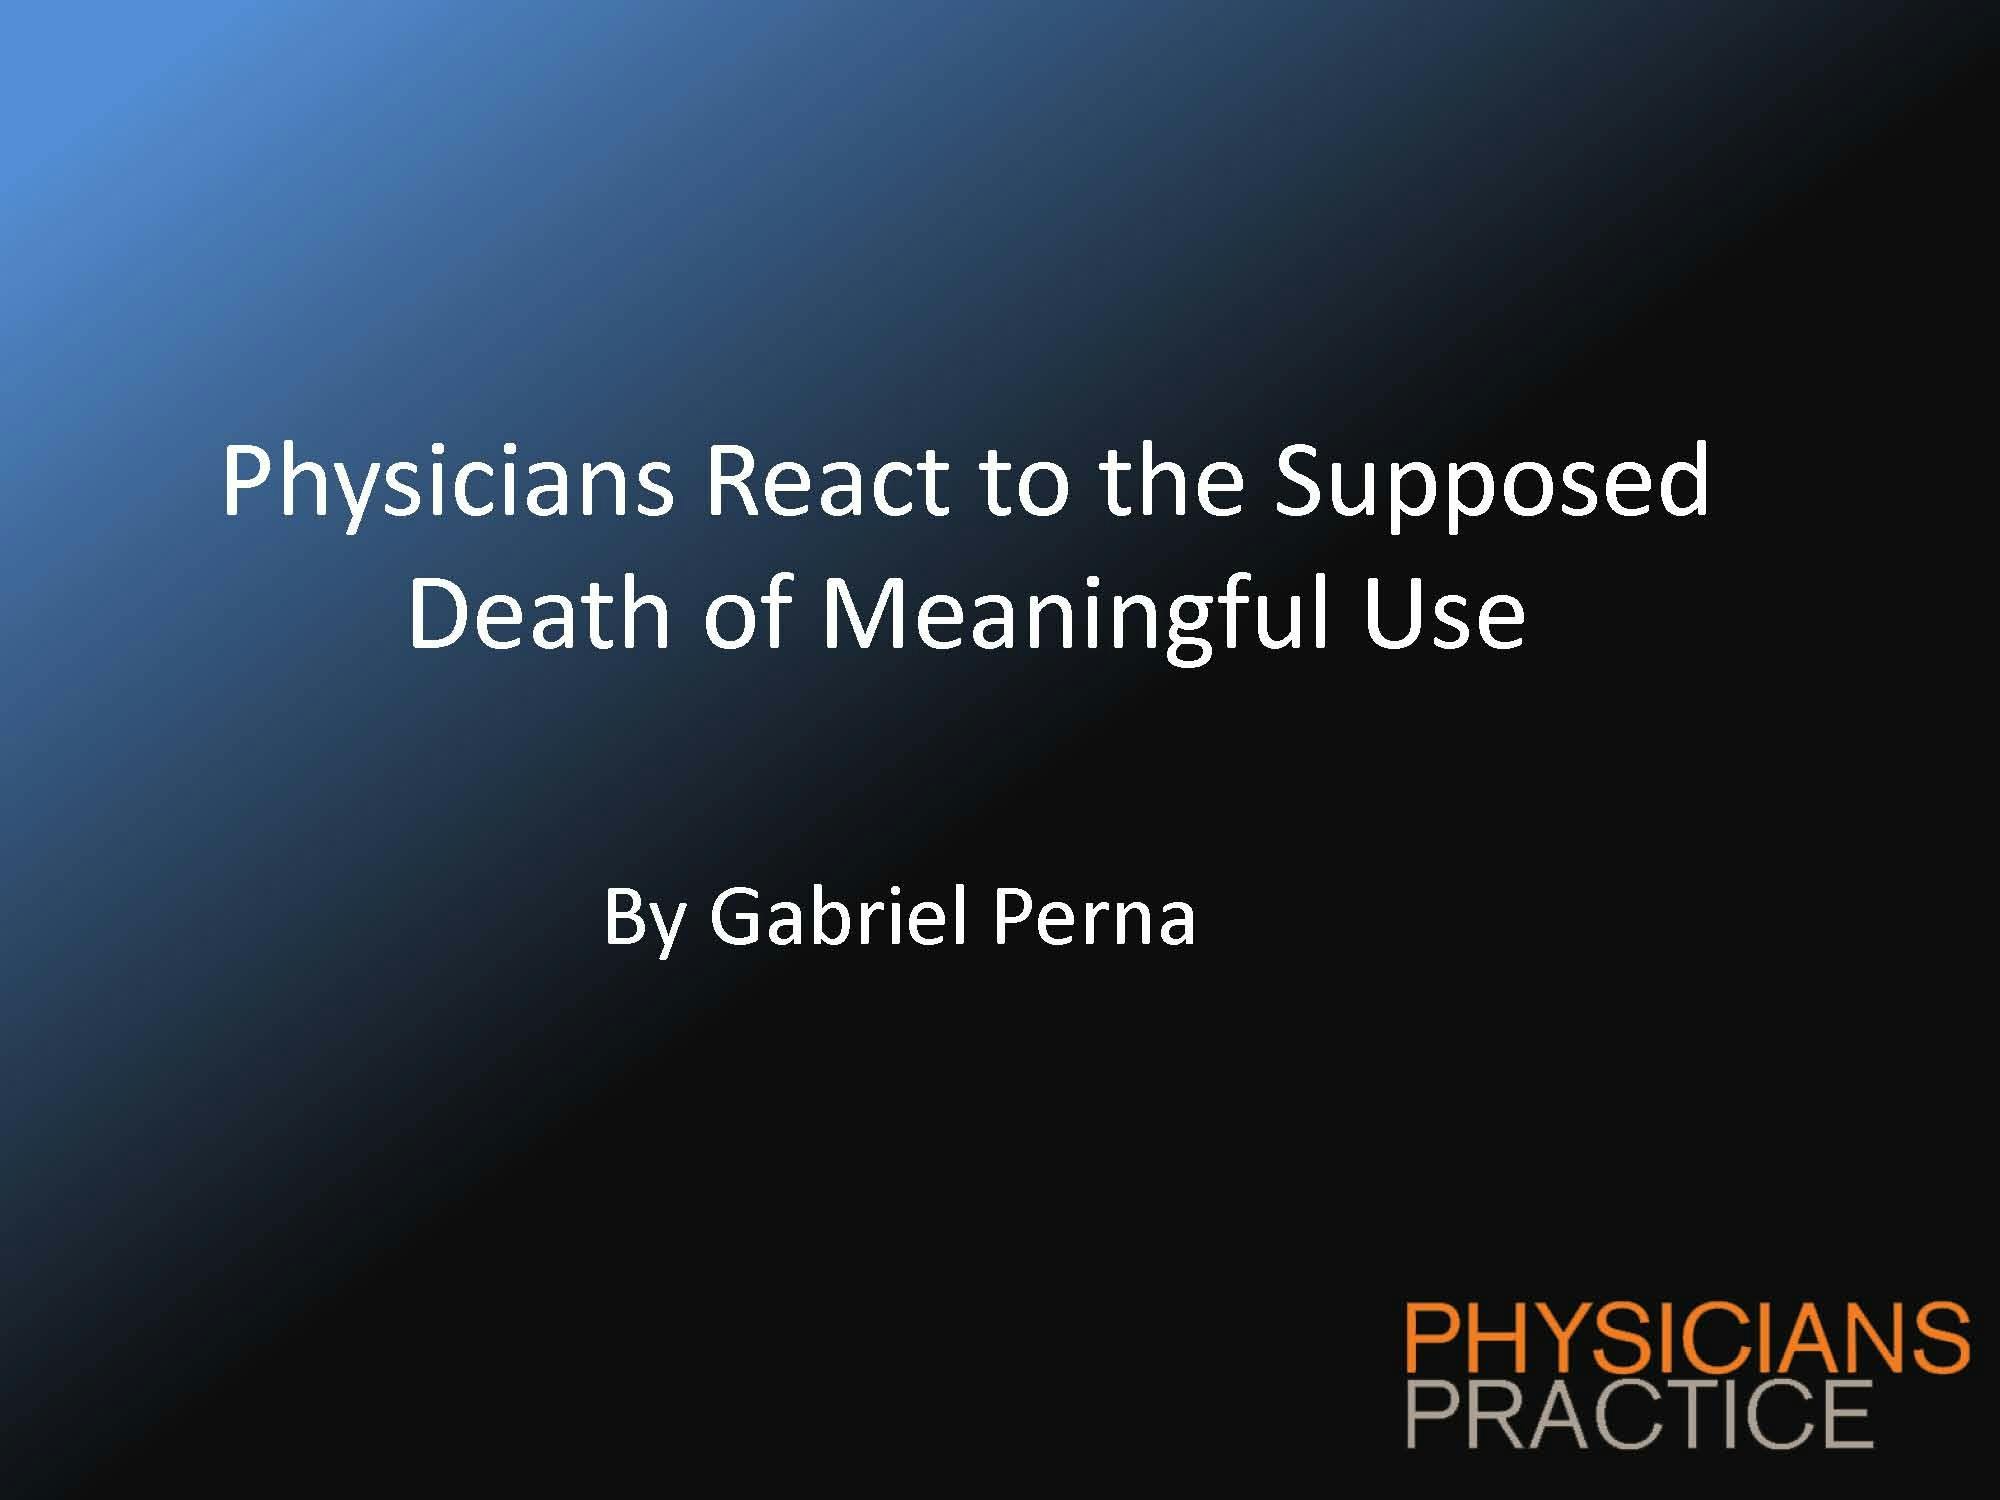 Physicians are Happy Meaningful Use is Almost Dead